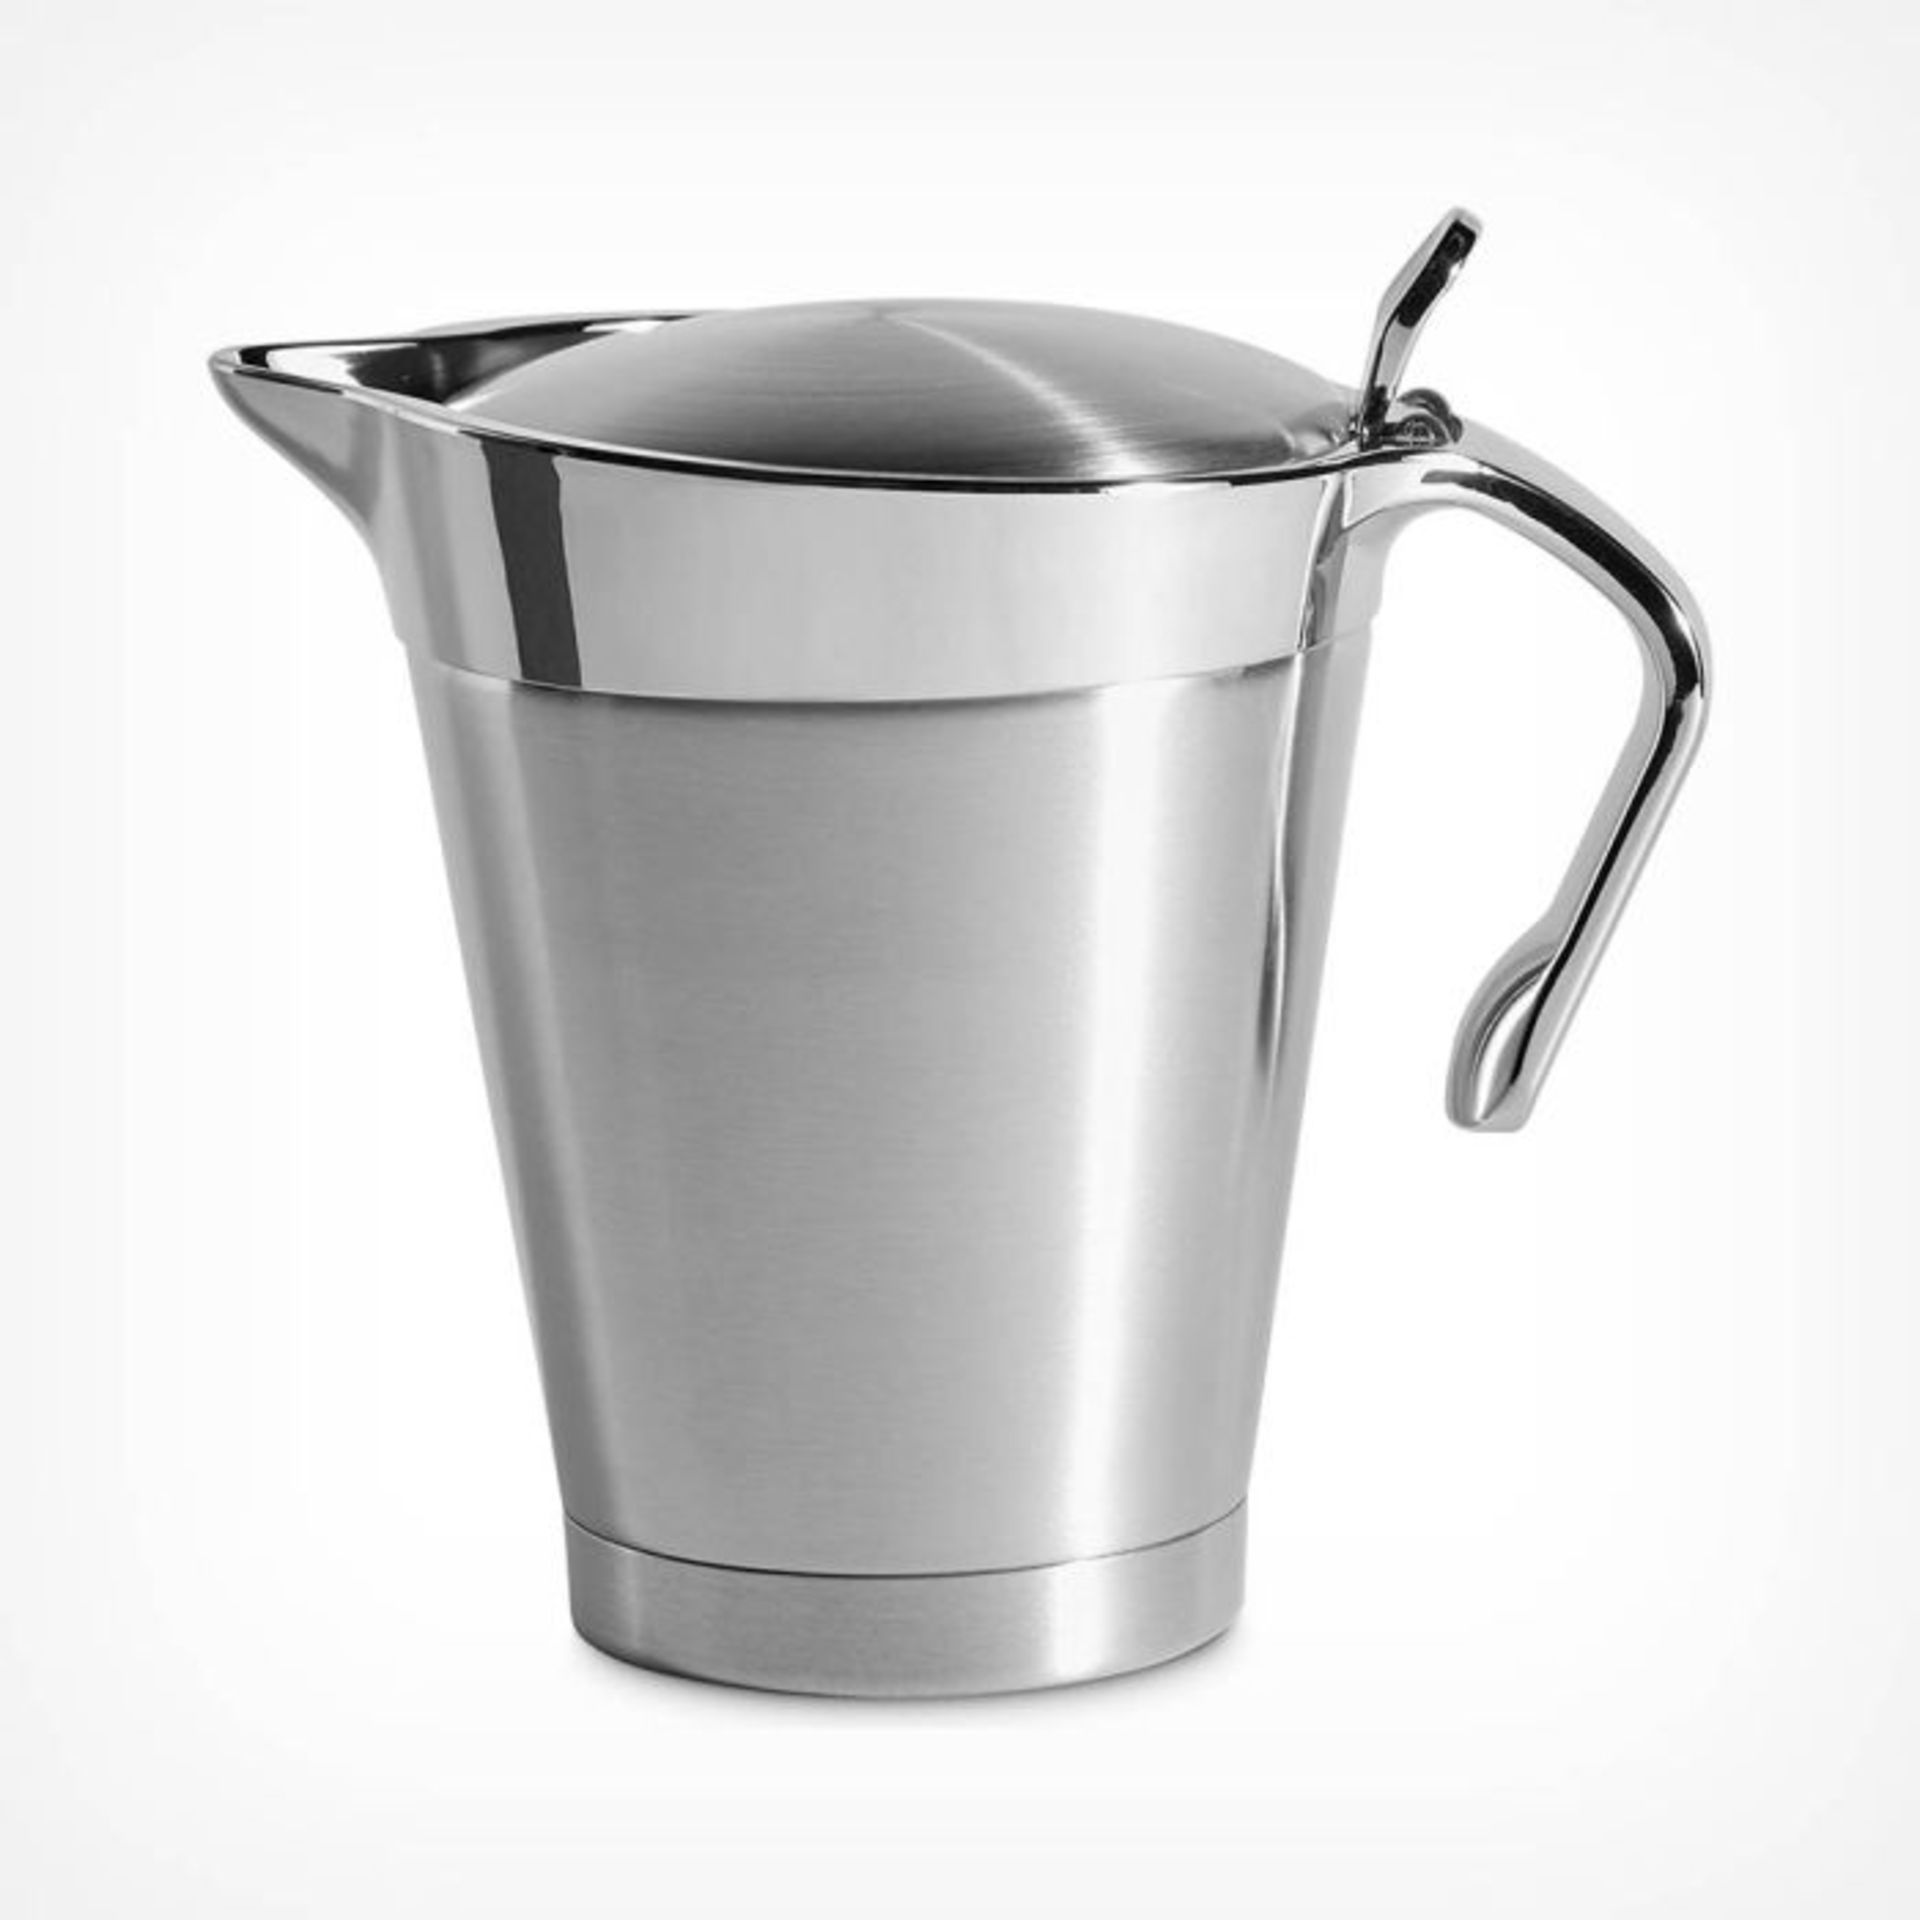 1L Insulated Gravy Jug. - ER36. Introduce a large gravy jug into your life and you’ll never go back;